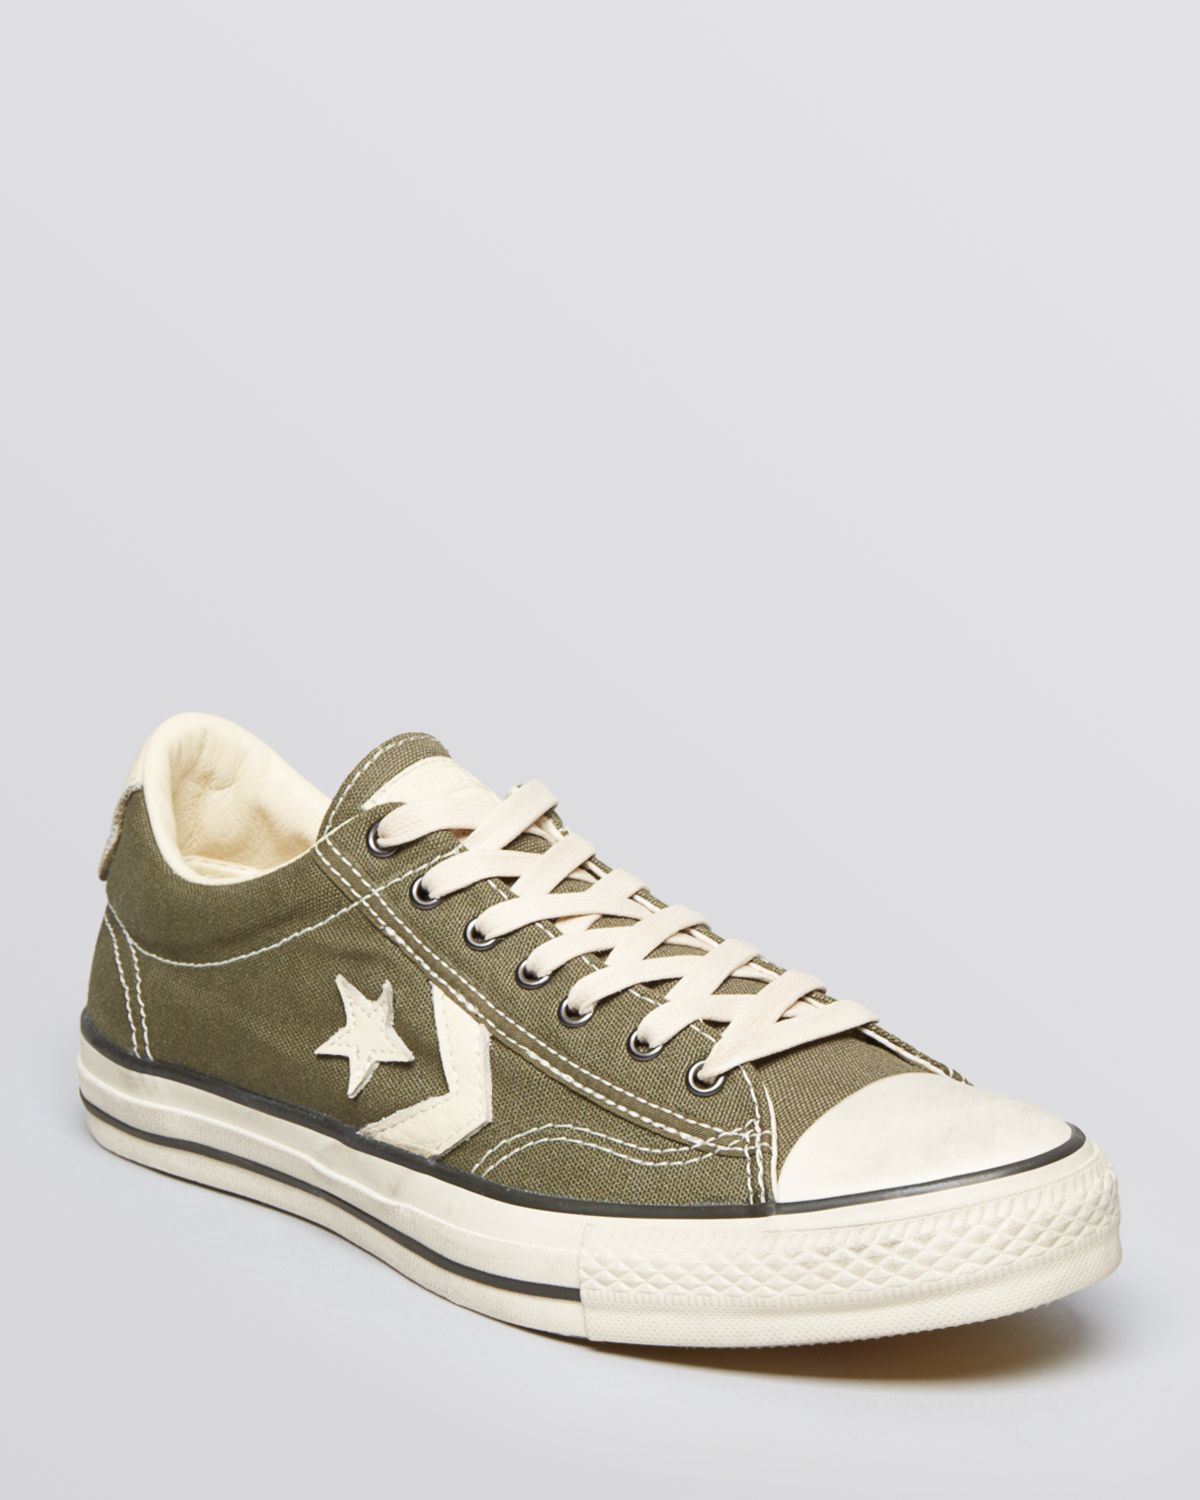 Converse By John Varvatos Star Player Ev Sneakers in Green for Men - Lyst